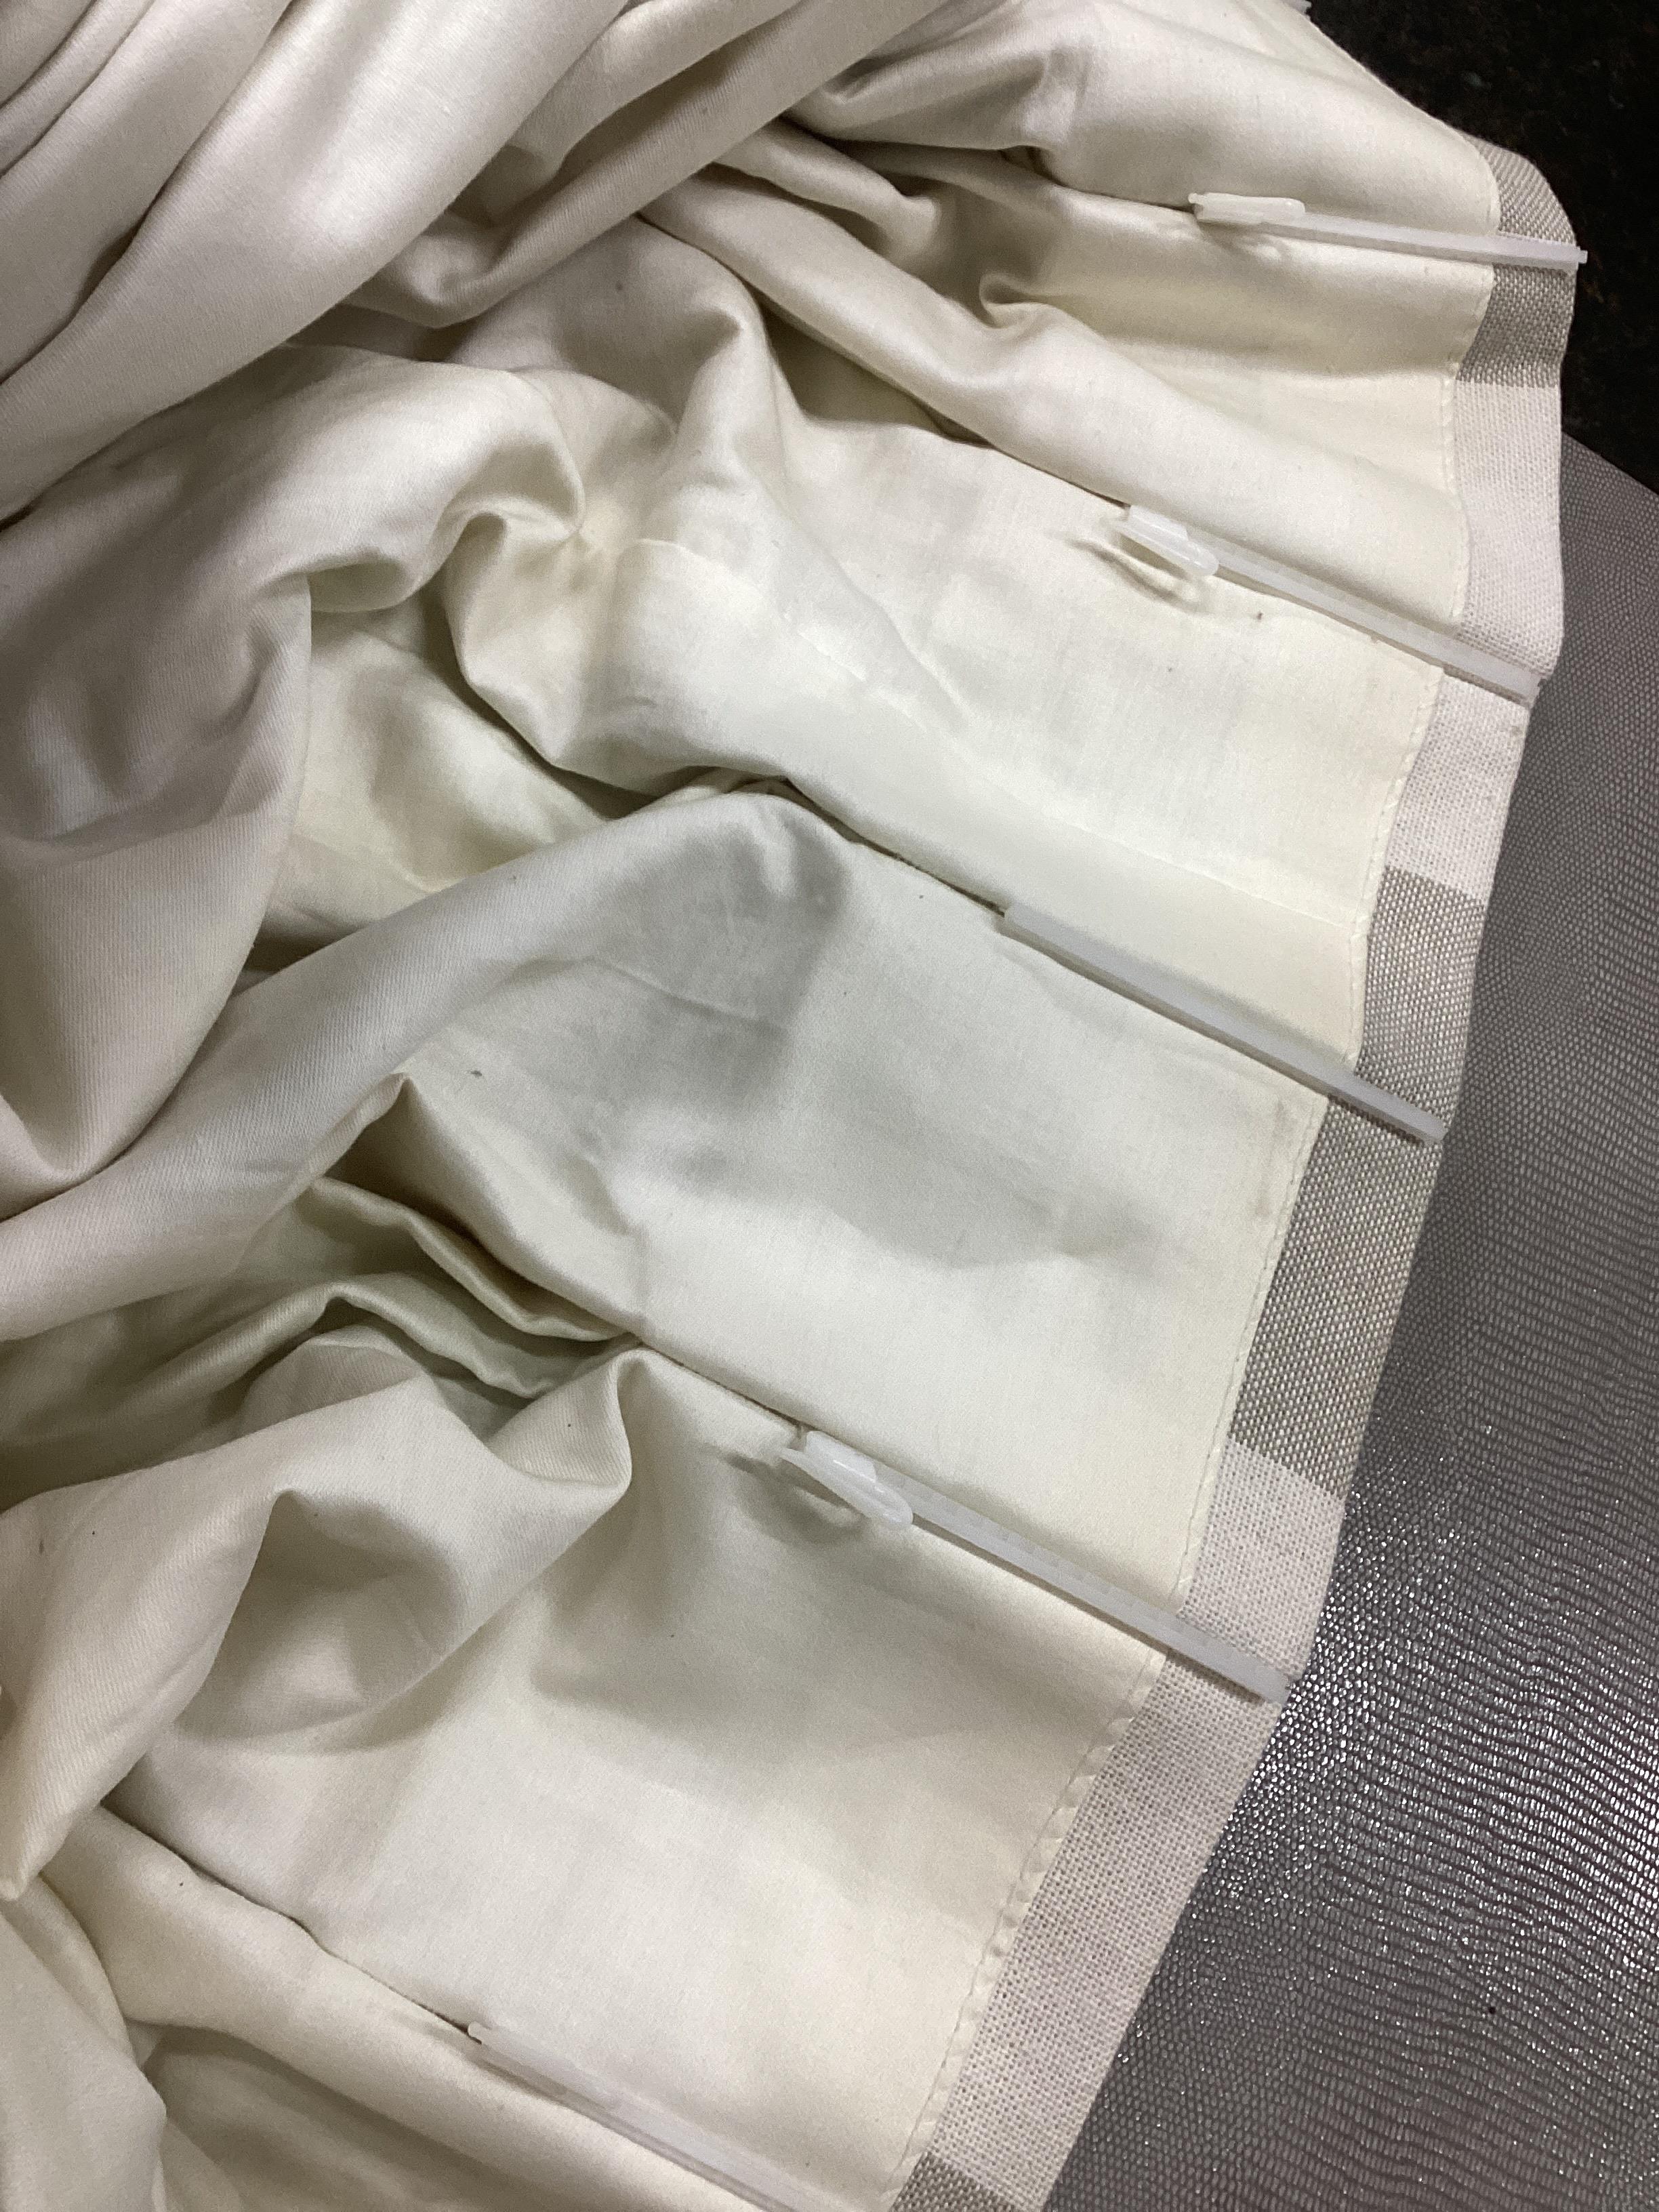 Three pairs of French grey and natural linen curtains, one pair 120cm / 440cm width, drop 224cm, two pairs 120cm / 320cm width, drop 210cm. (All measurements approximate).